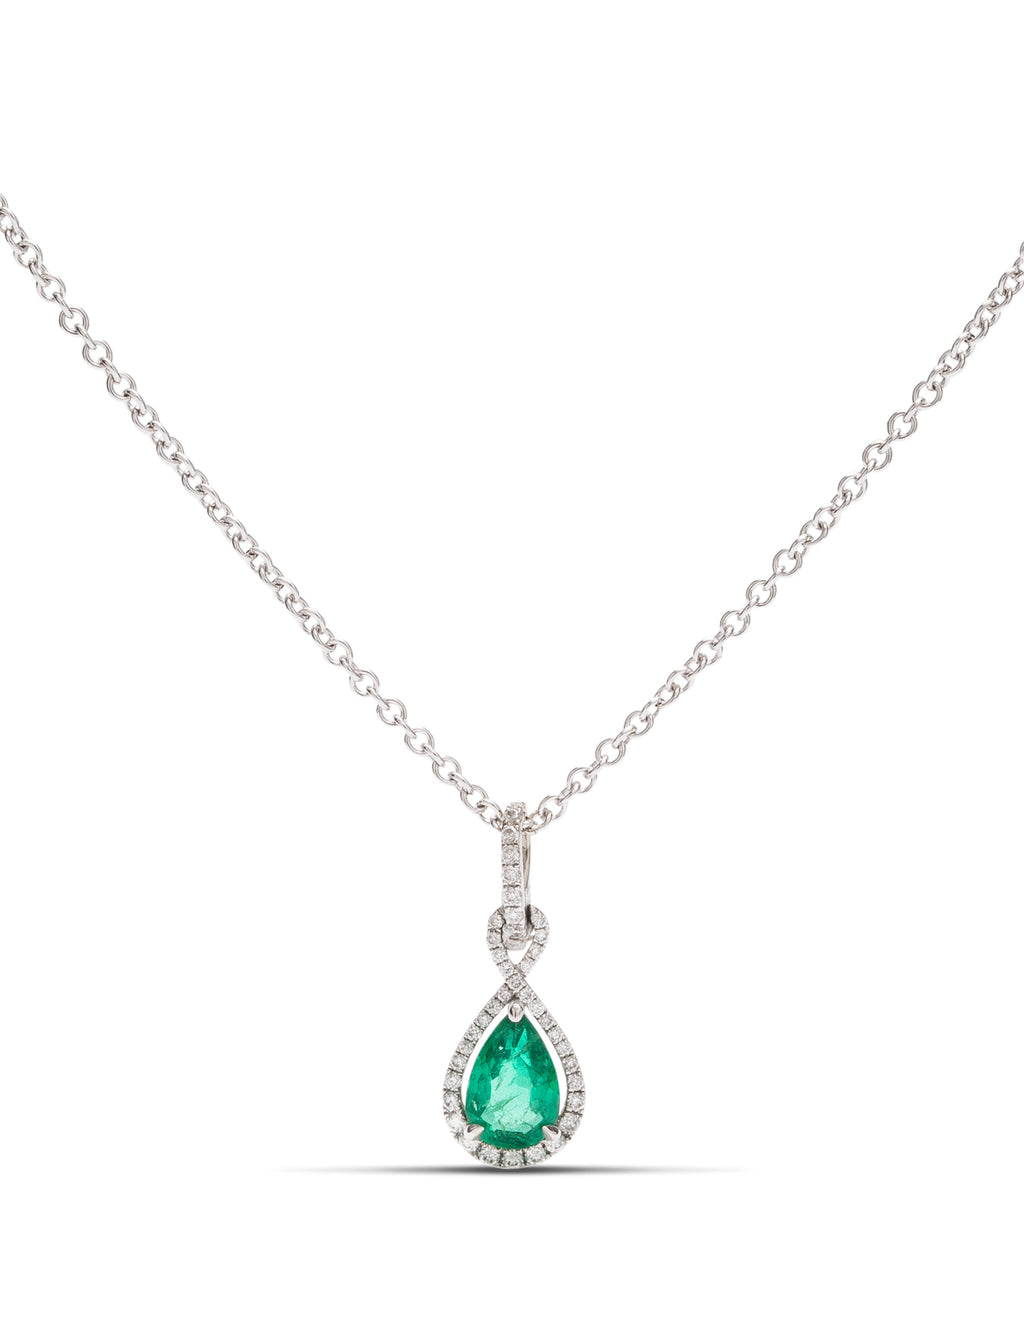 Emerald and Diamond Necklace - Charles Koll Jewellers